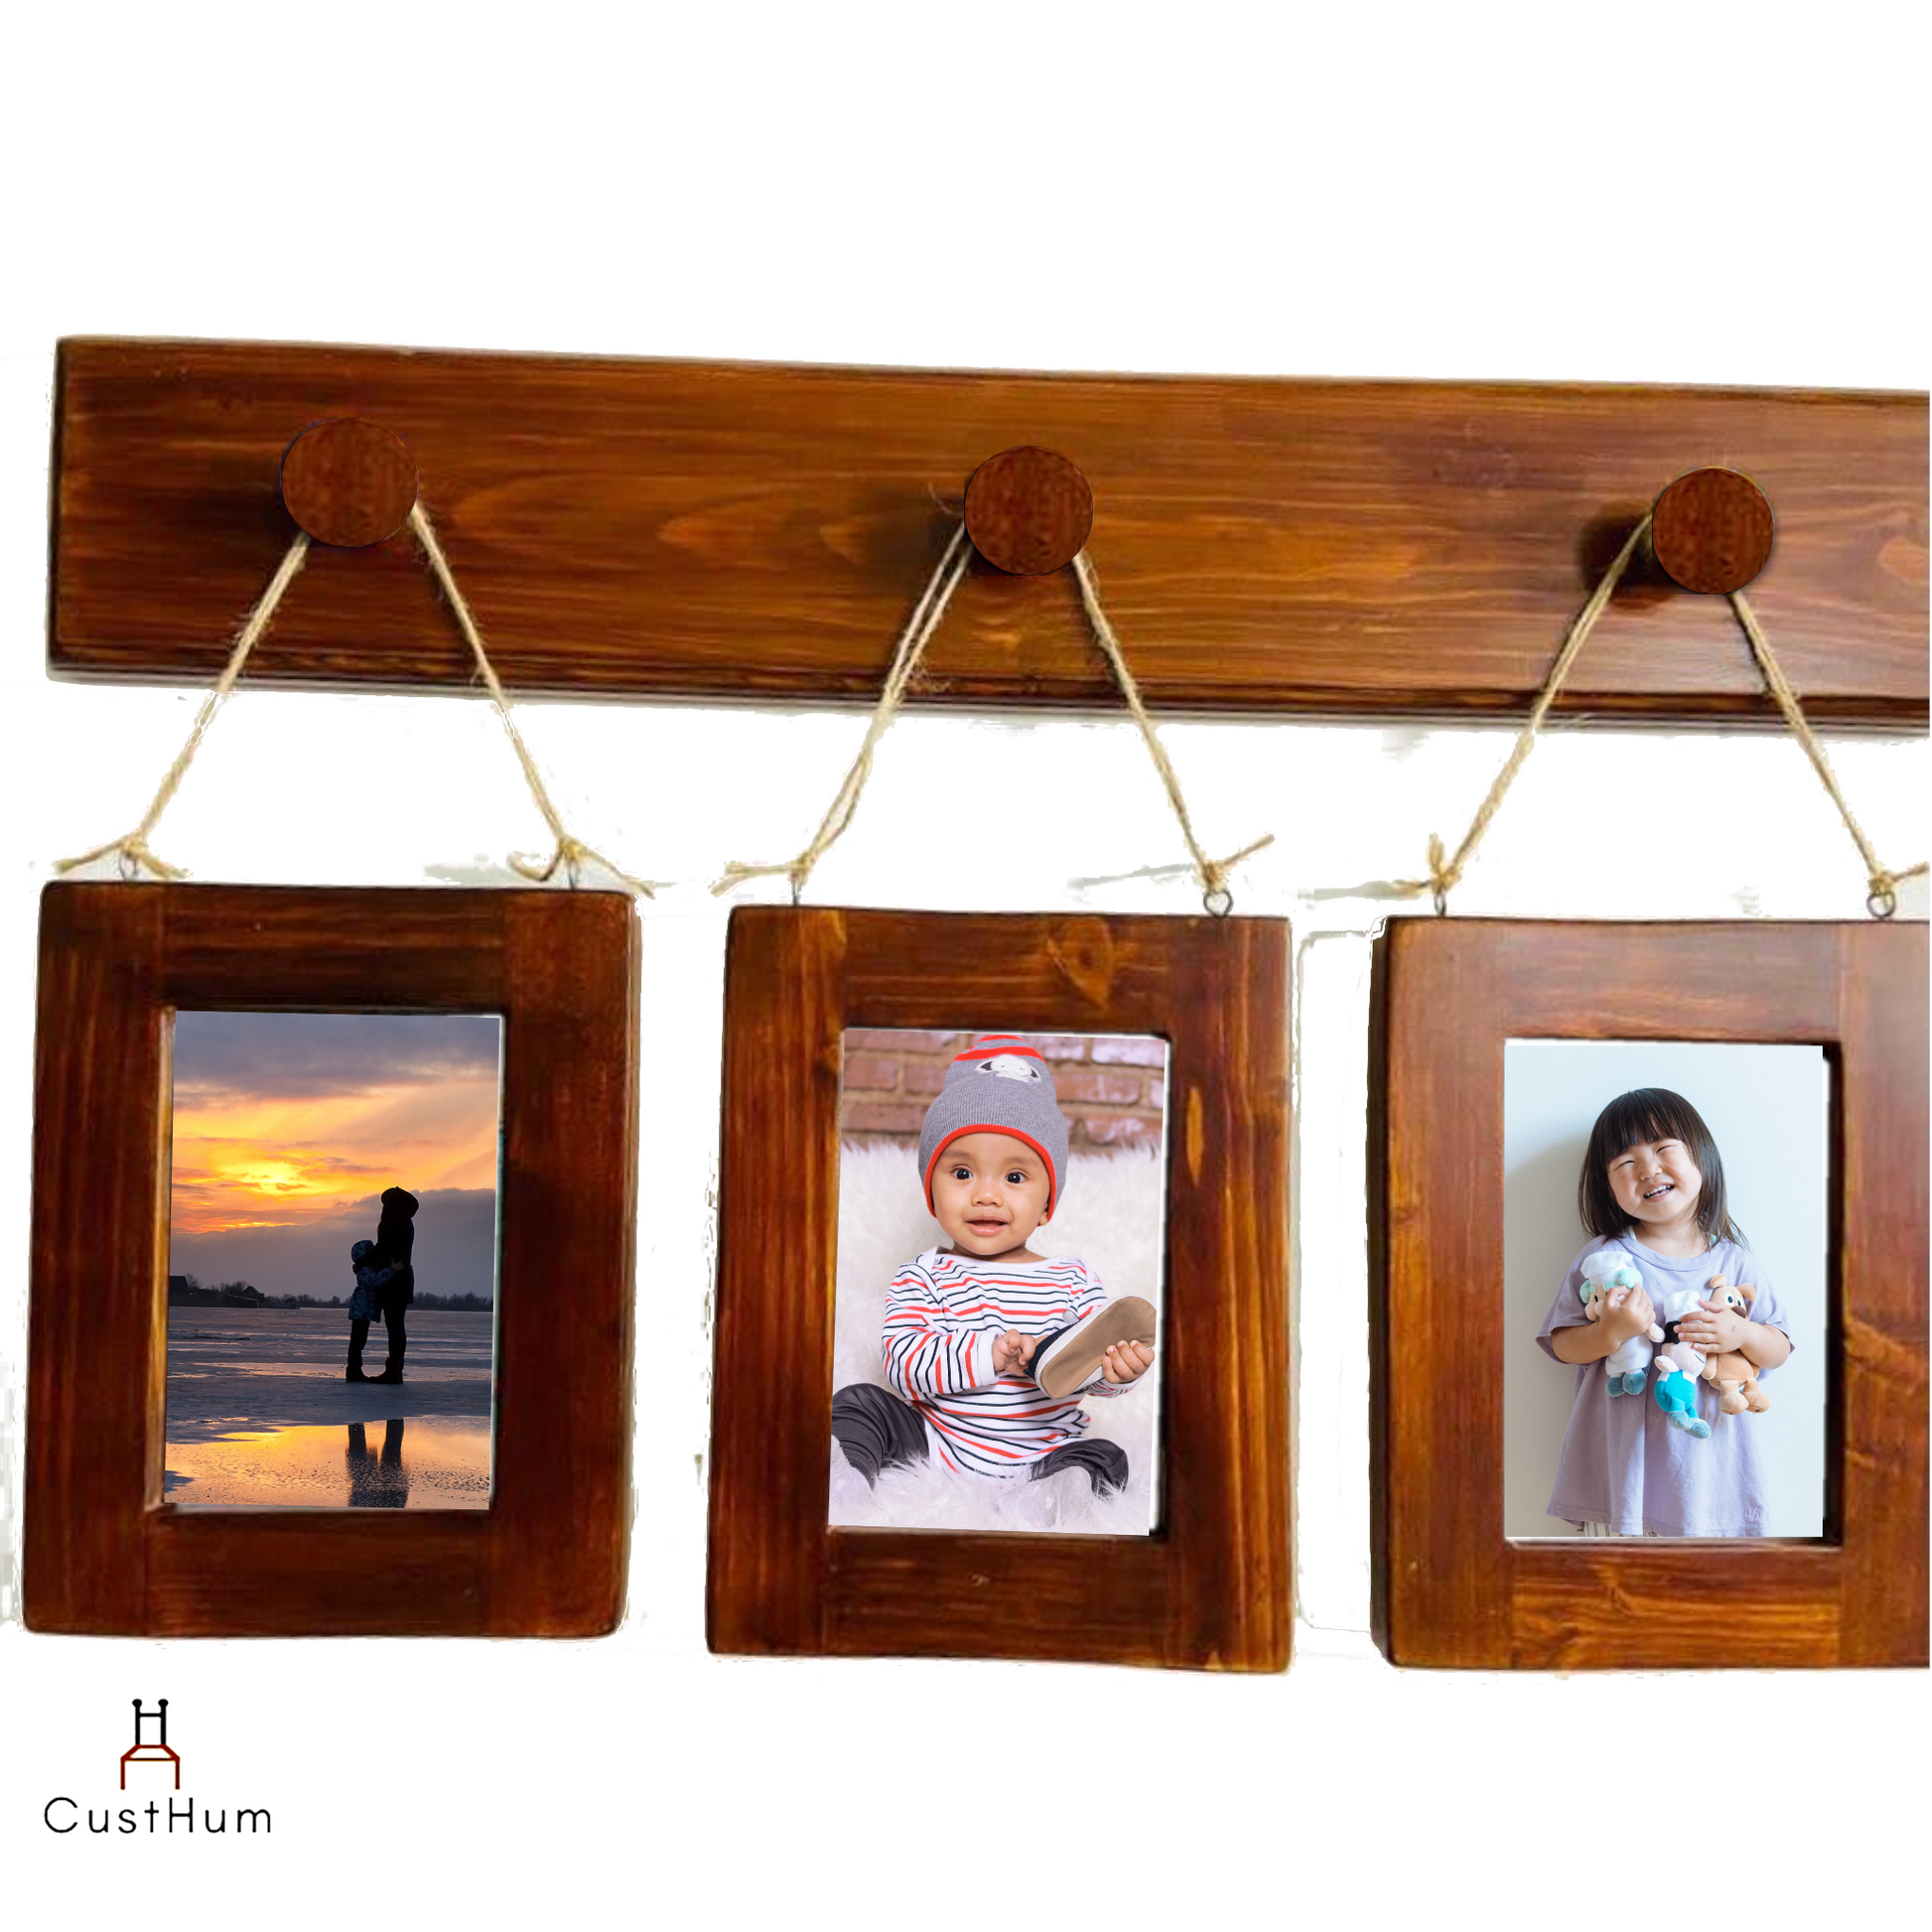 CustHum-Moneta-wooden photo frame gallery with 3 wooden knobs and strings